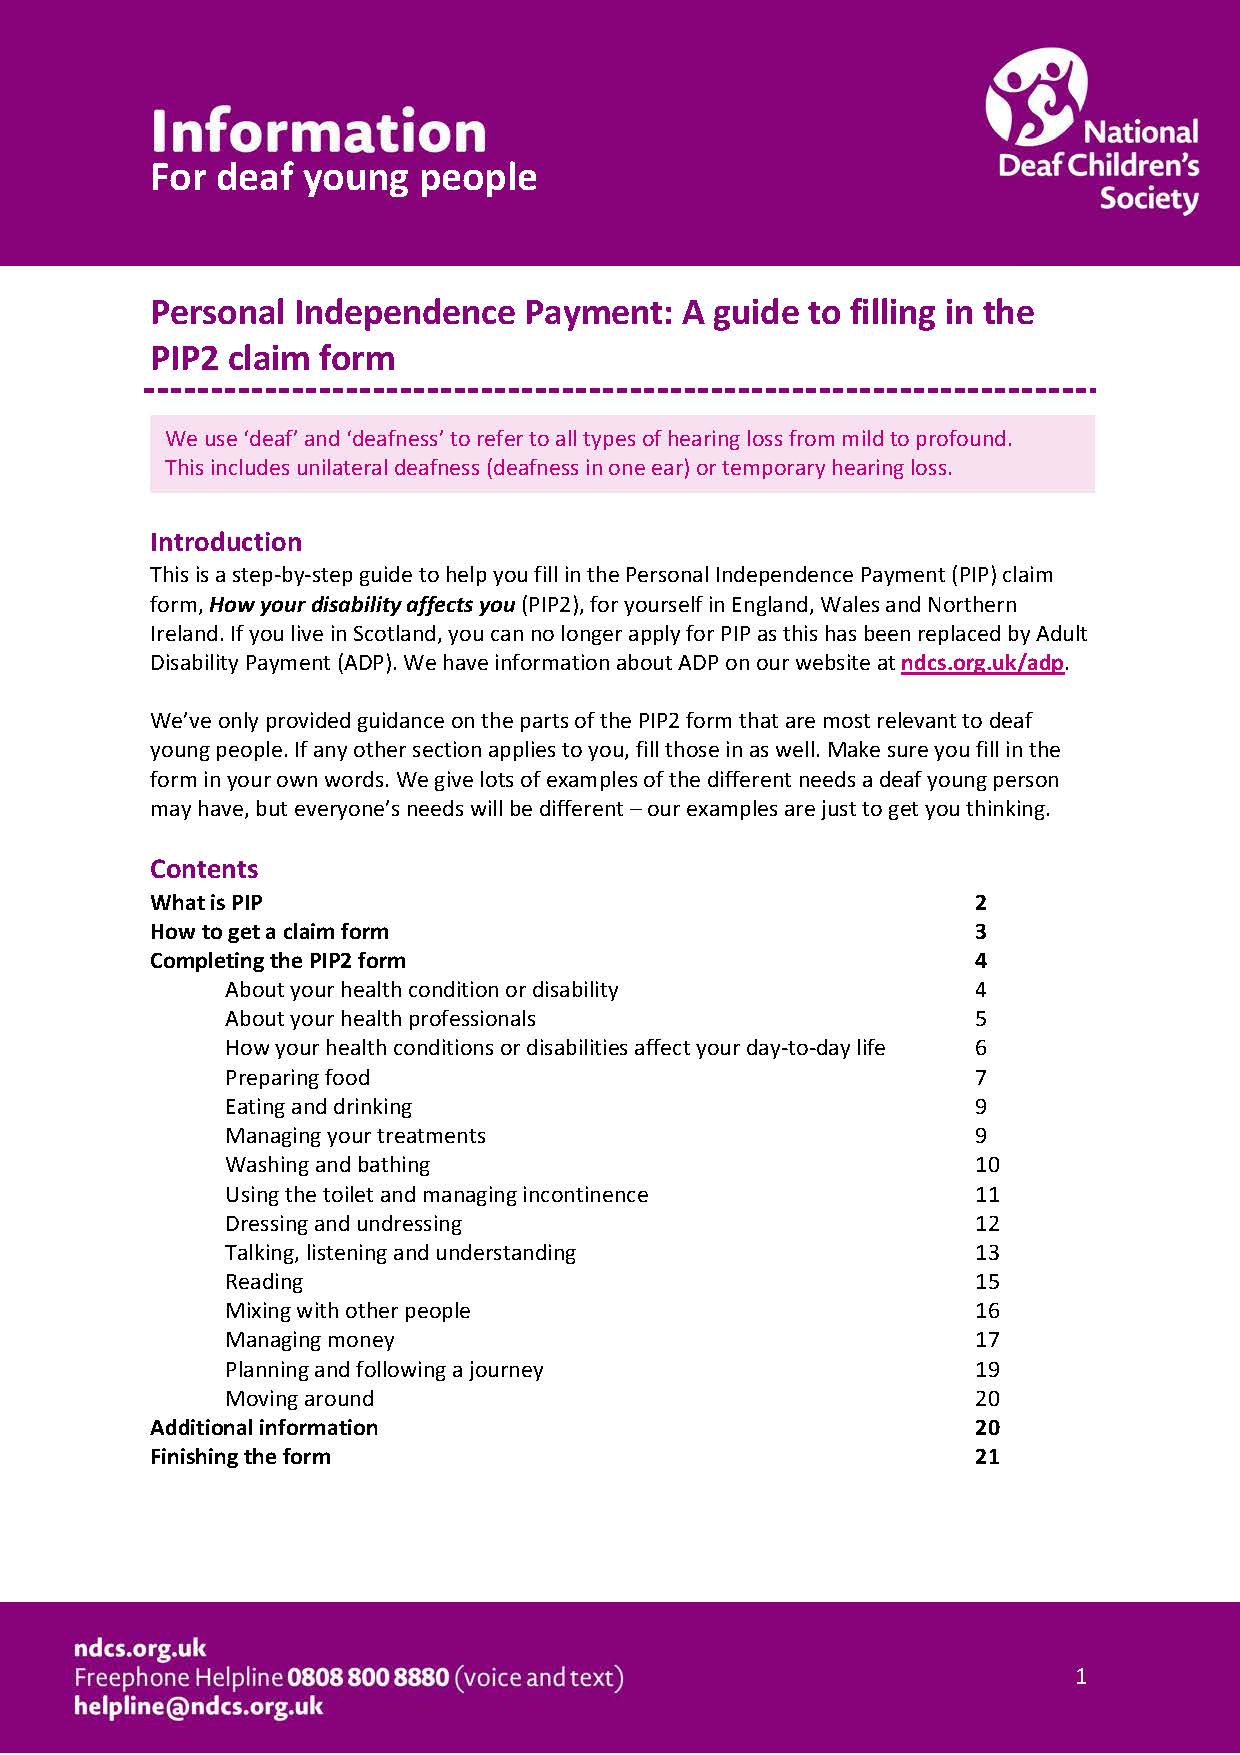 Personal Independence Payment: A guide to filling in the PIP2 form